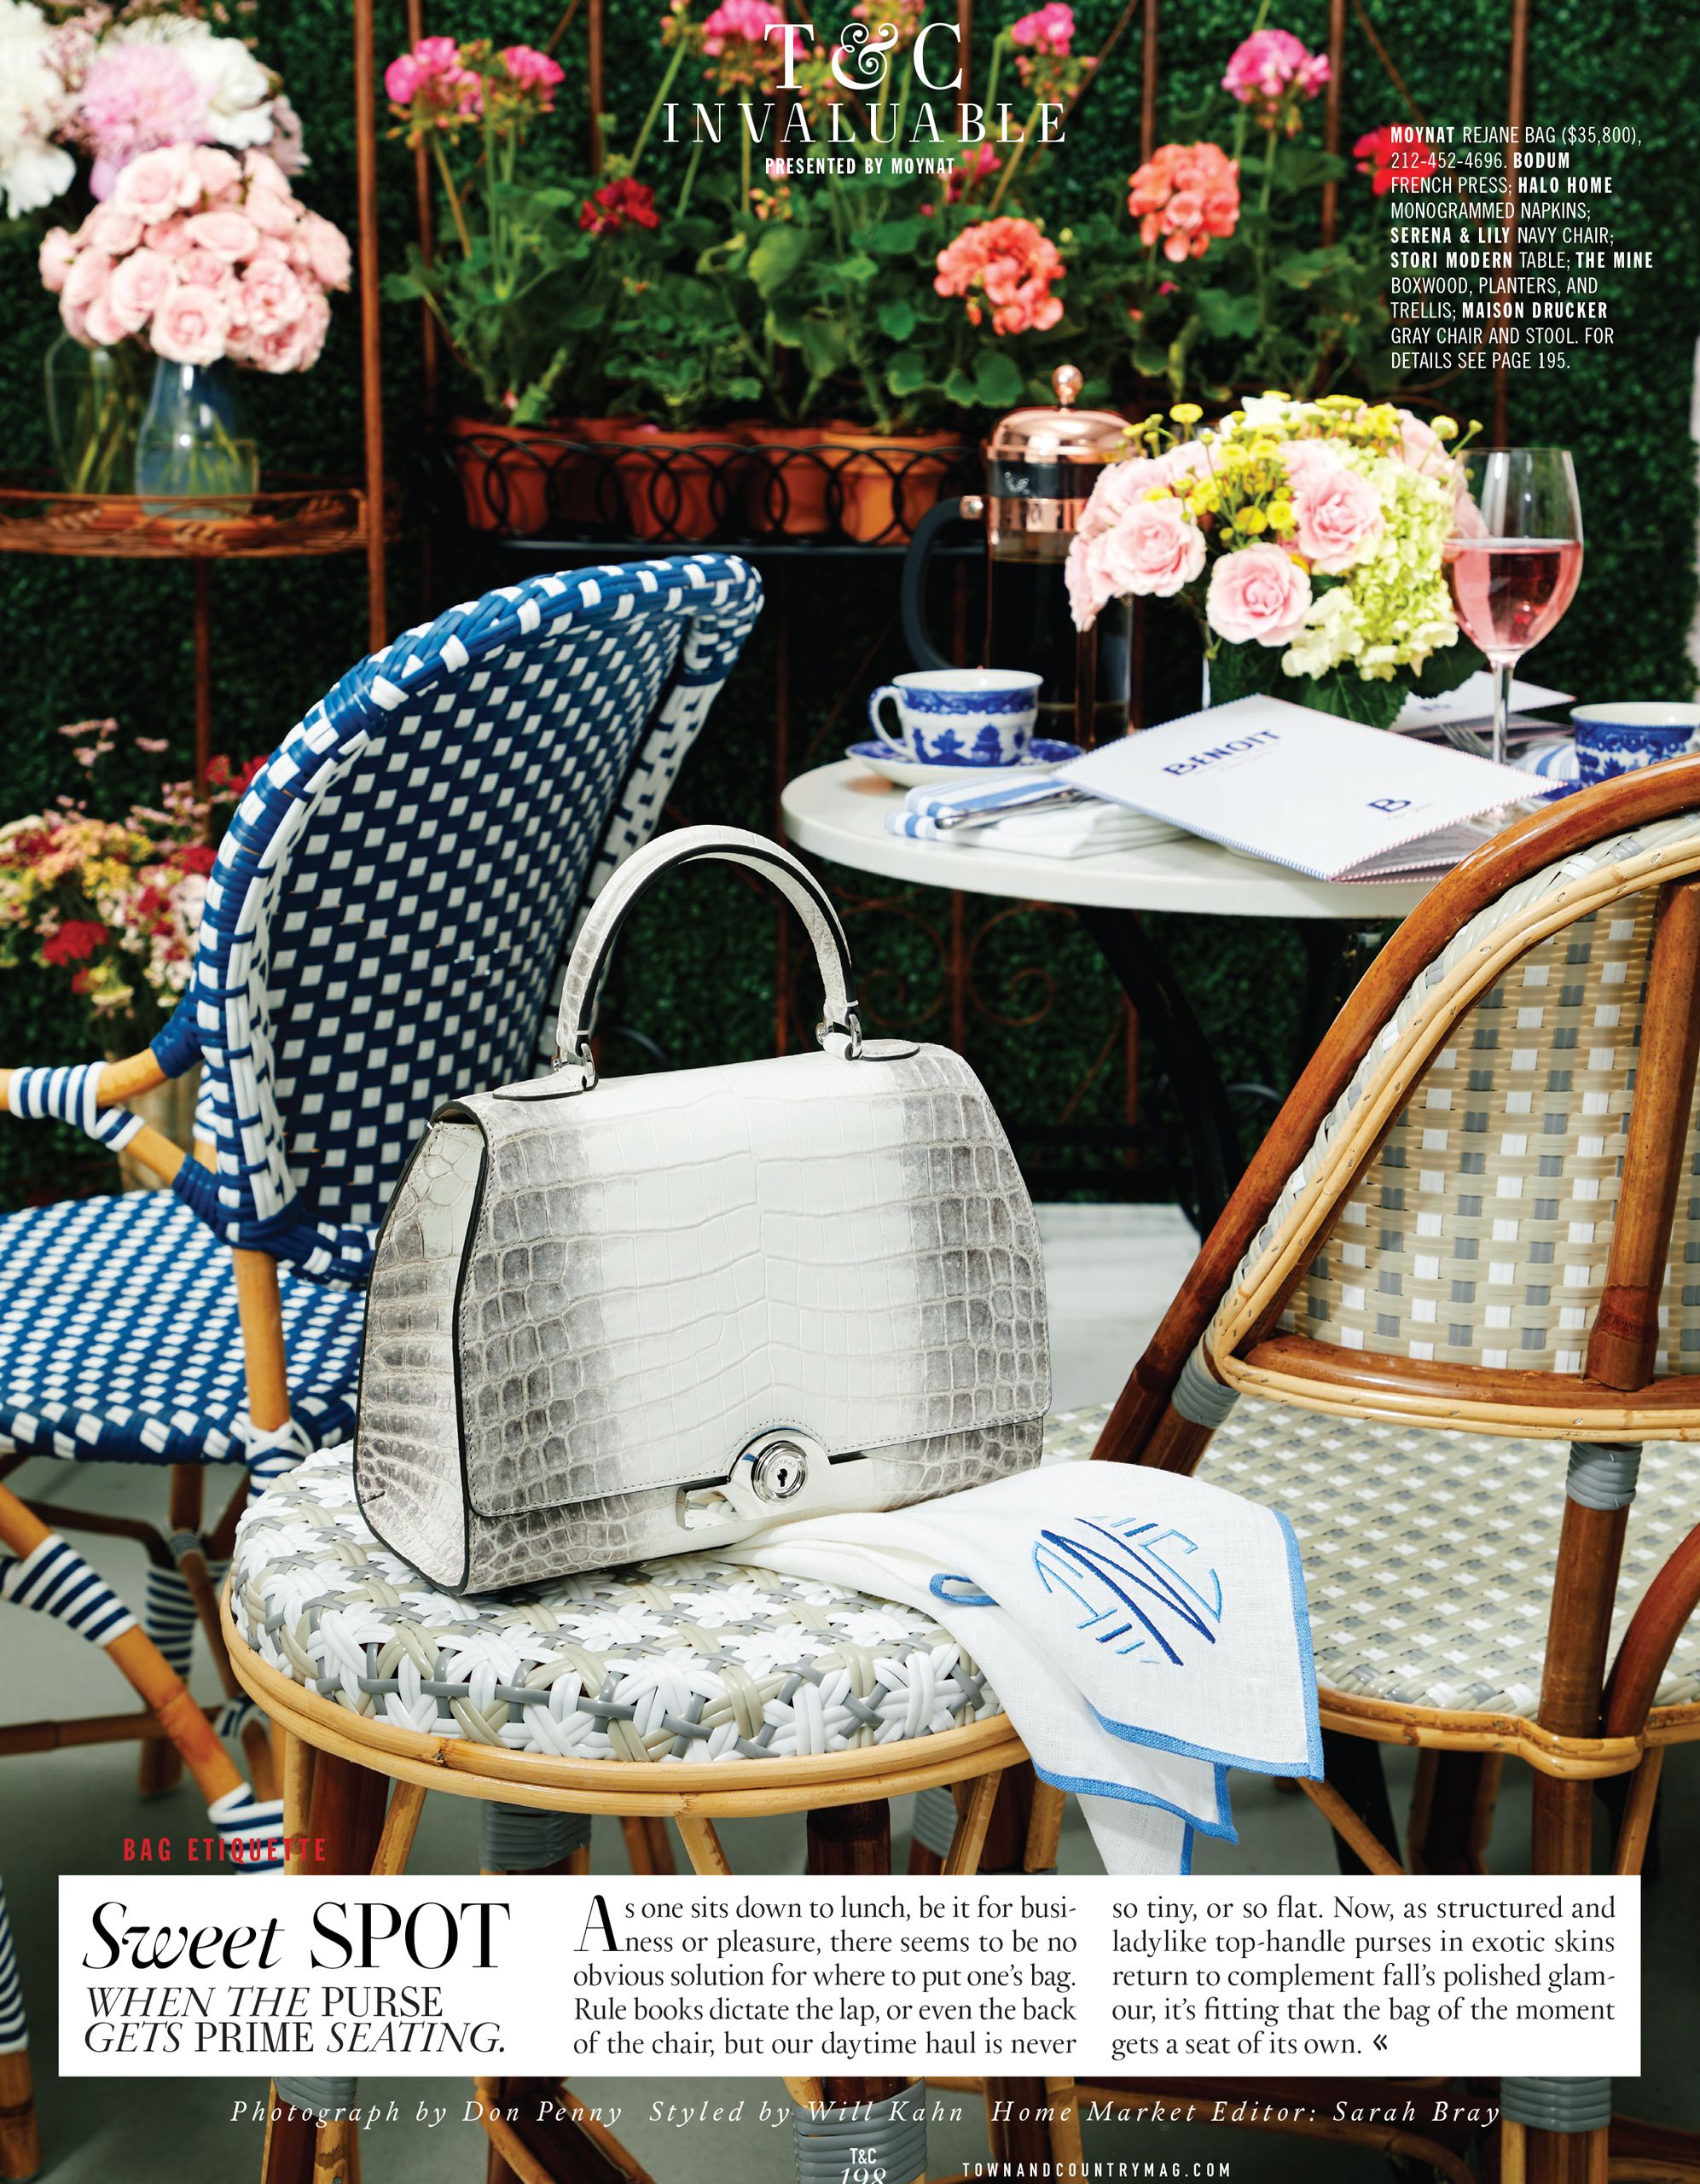 Town and Country Invaluable. Moynat